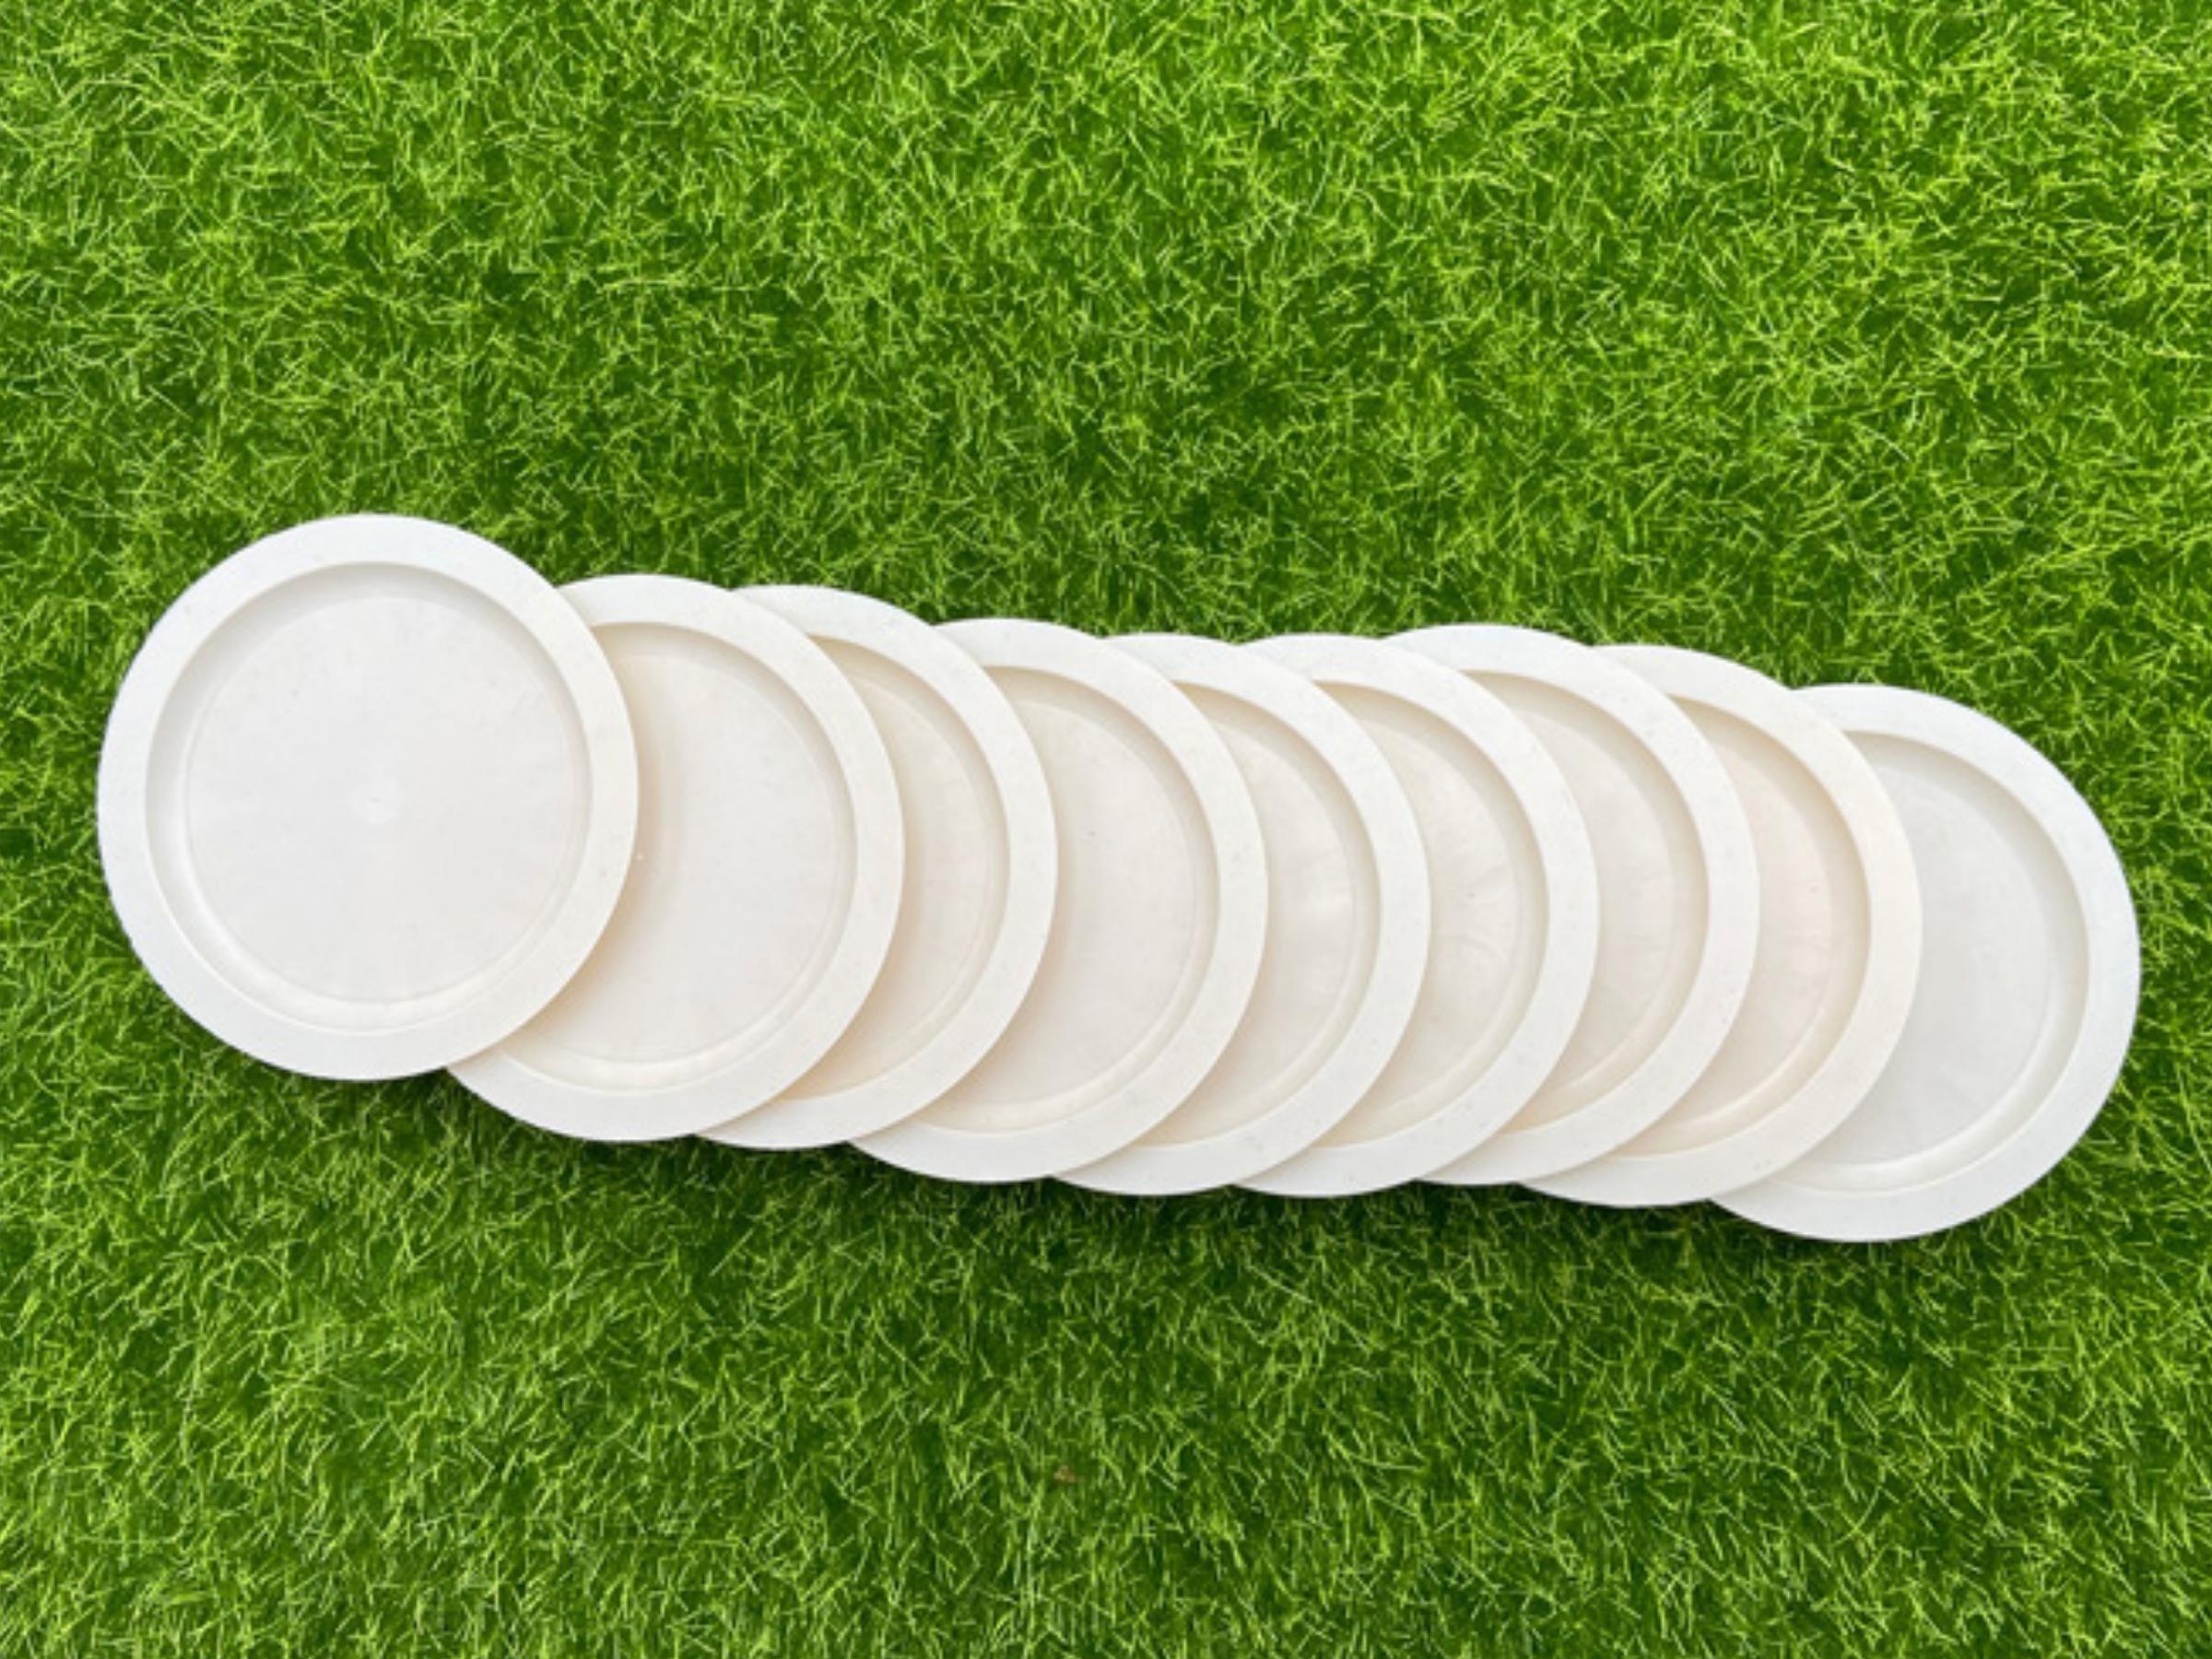 CHANYI Bamboo Sealing Discs - 100% Compostable Plant-Based Bamboo Fiber, Eco Friendly, Biodegradable for Cosmetic Cream Jars